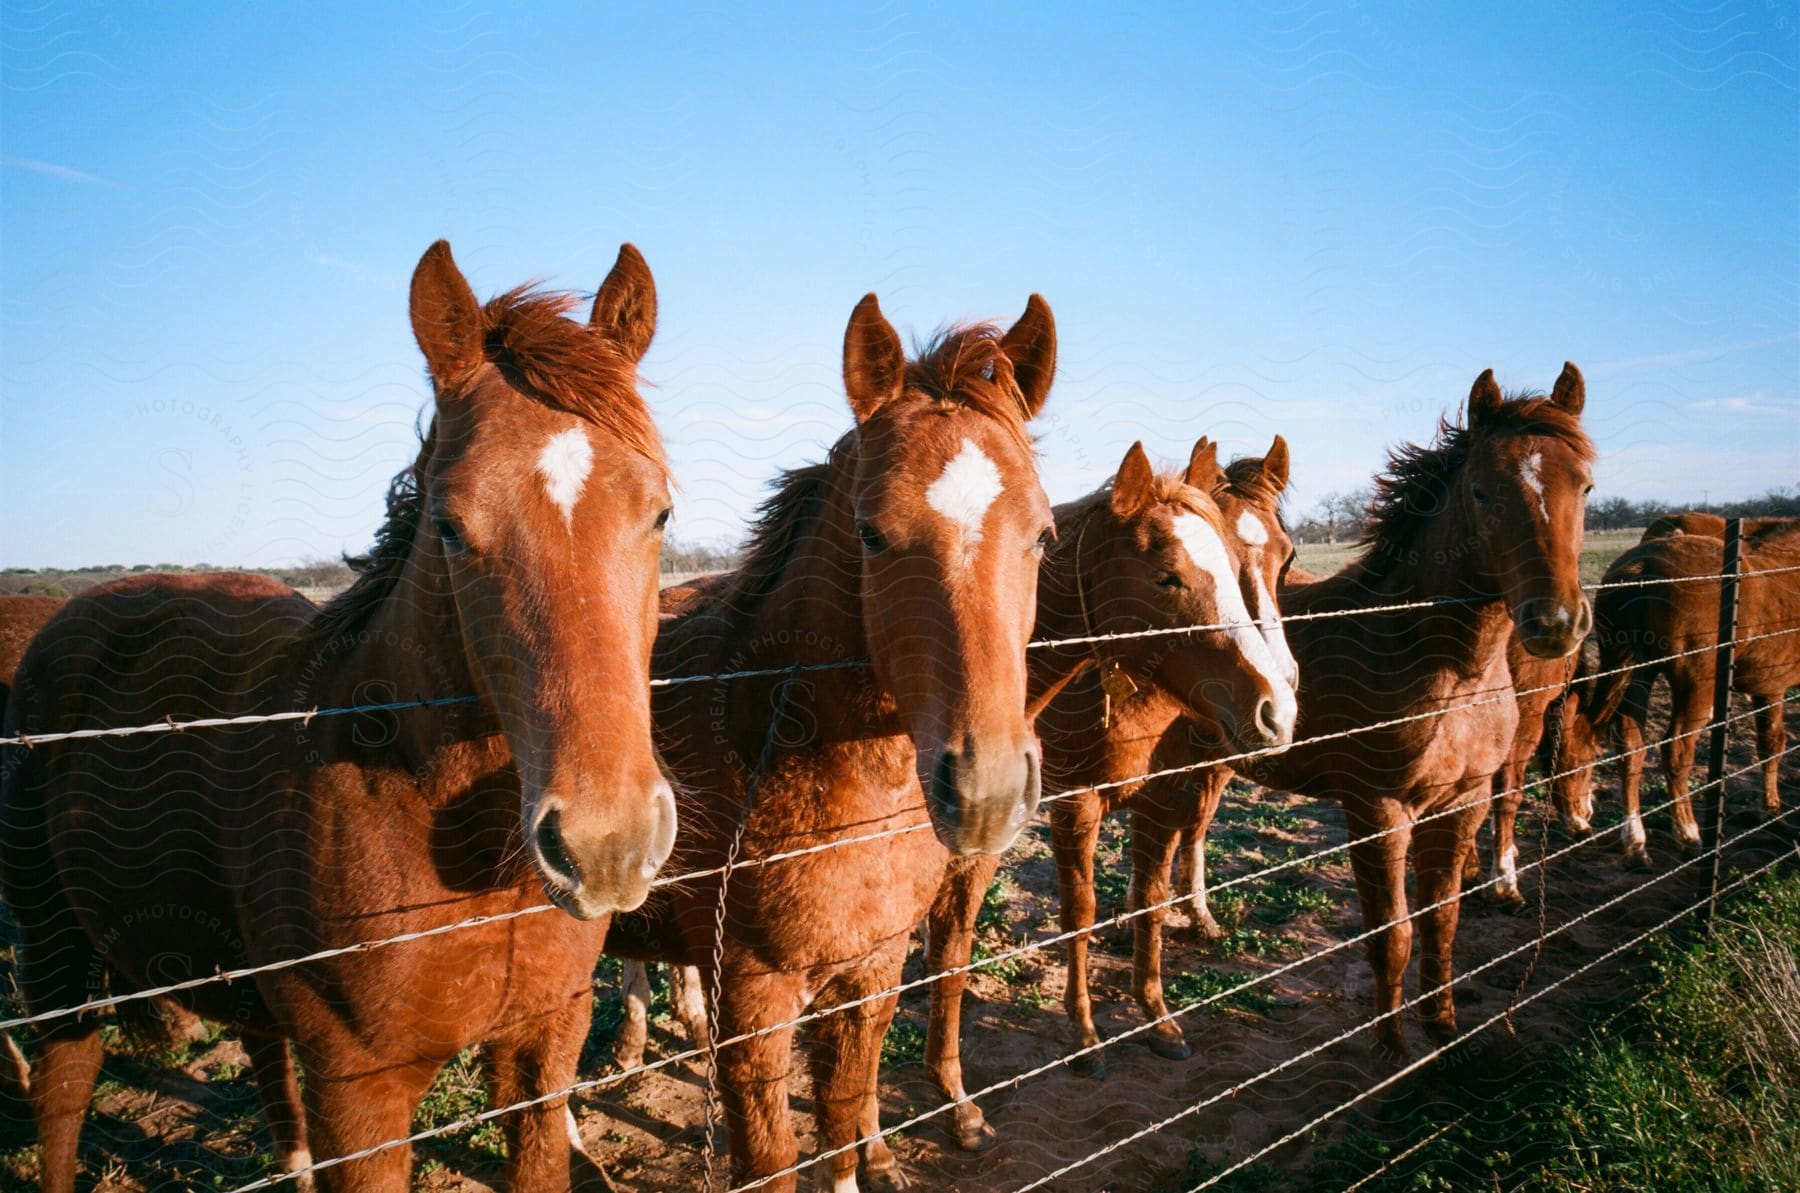 Many horses standing on a field behind a fence on a clear sunny day